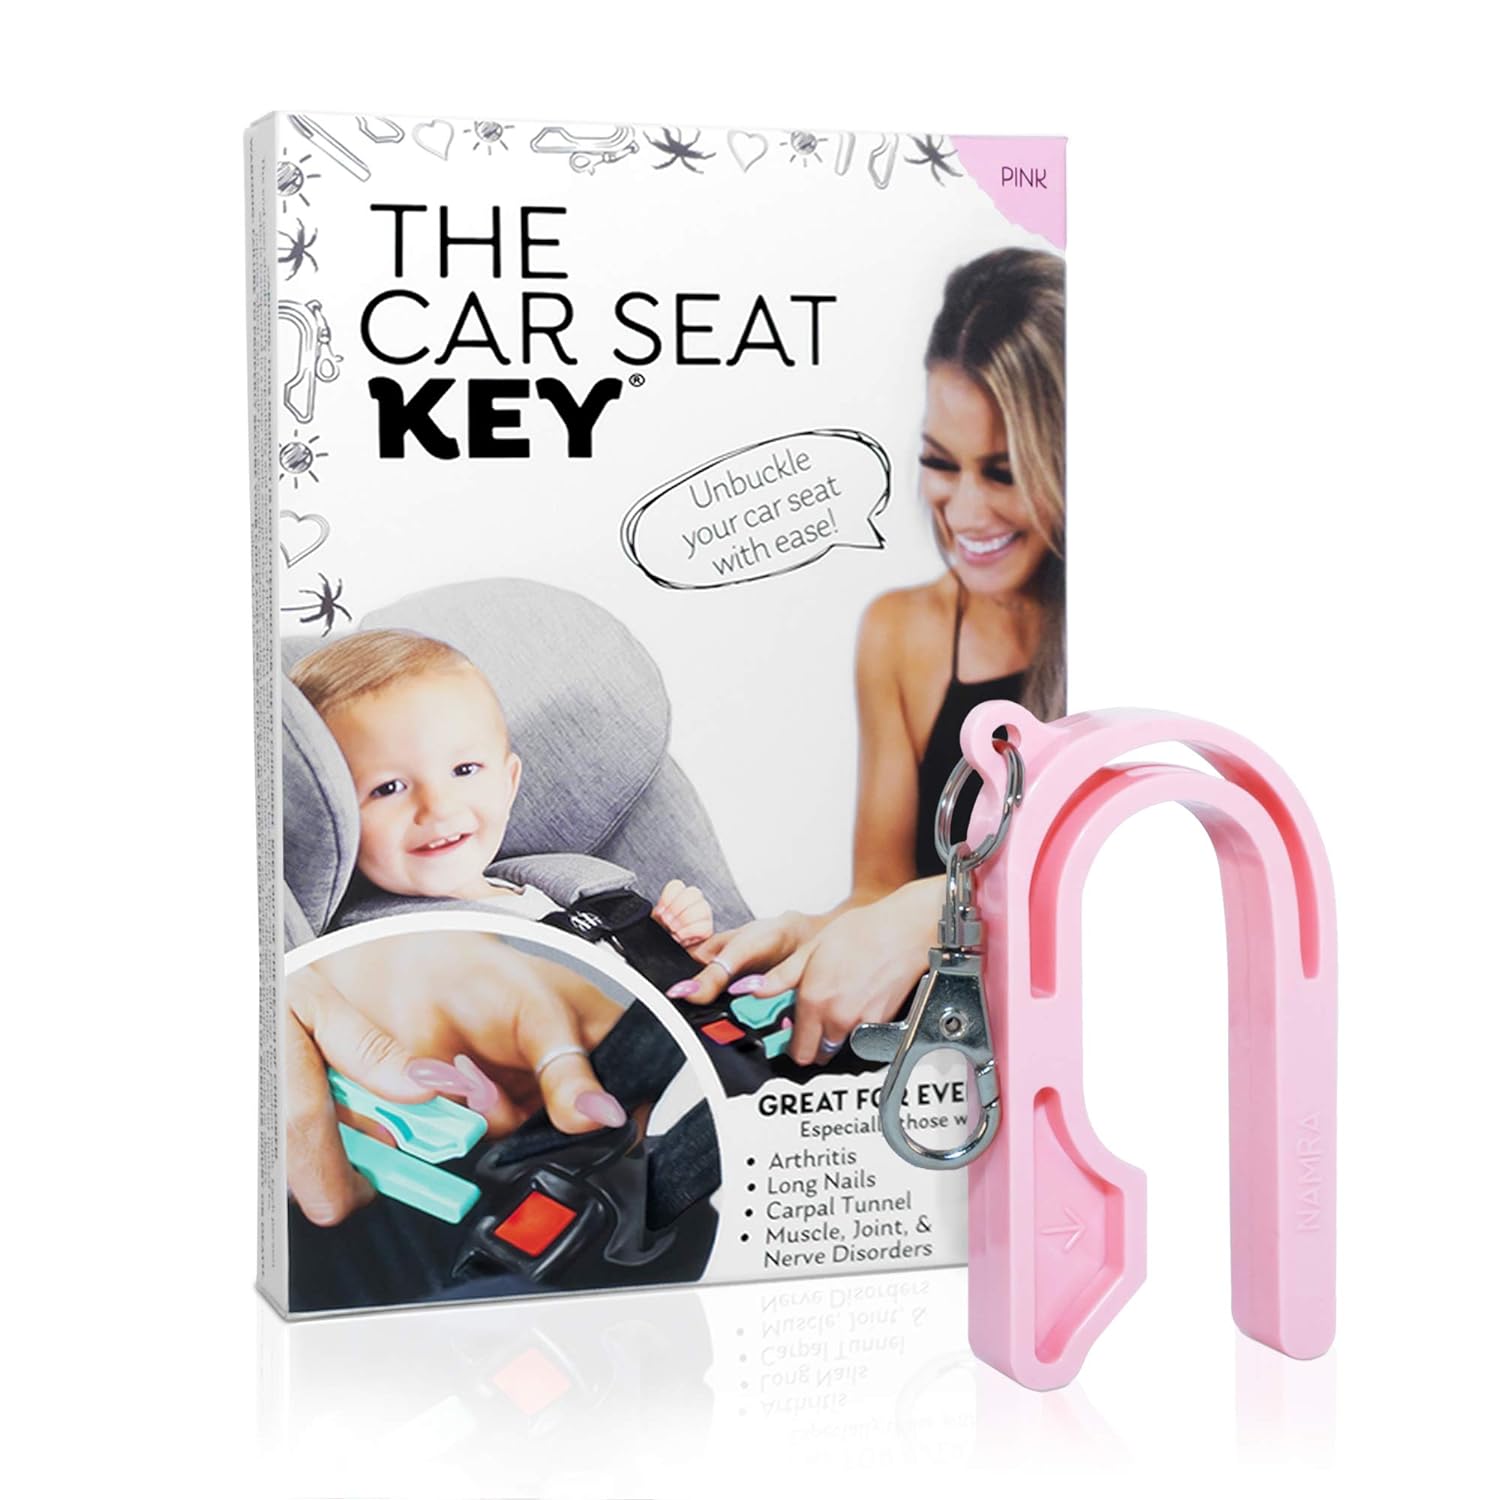 The Car Seat Key - Original Car Seat Key Chain Buckle Release Tool - Easy Unbuckle Opener Aid for Nails, Parents, Grandparents Older Children by NAMRA Made in USA (Pink)